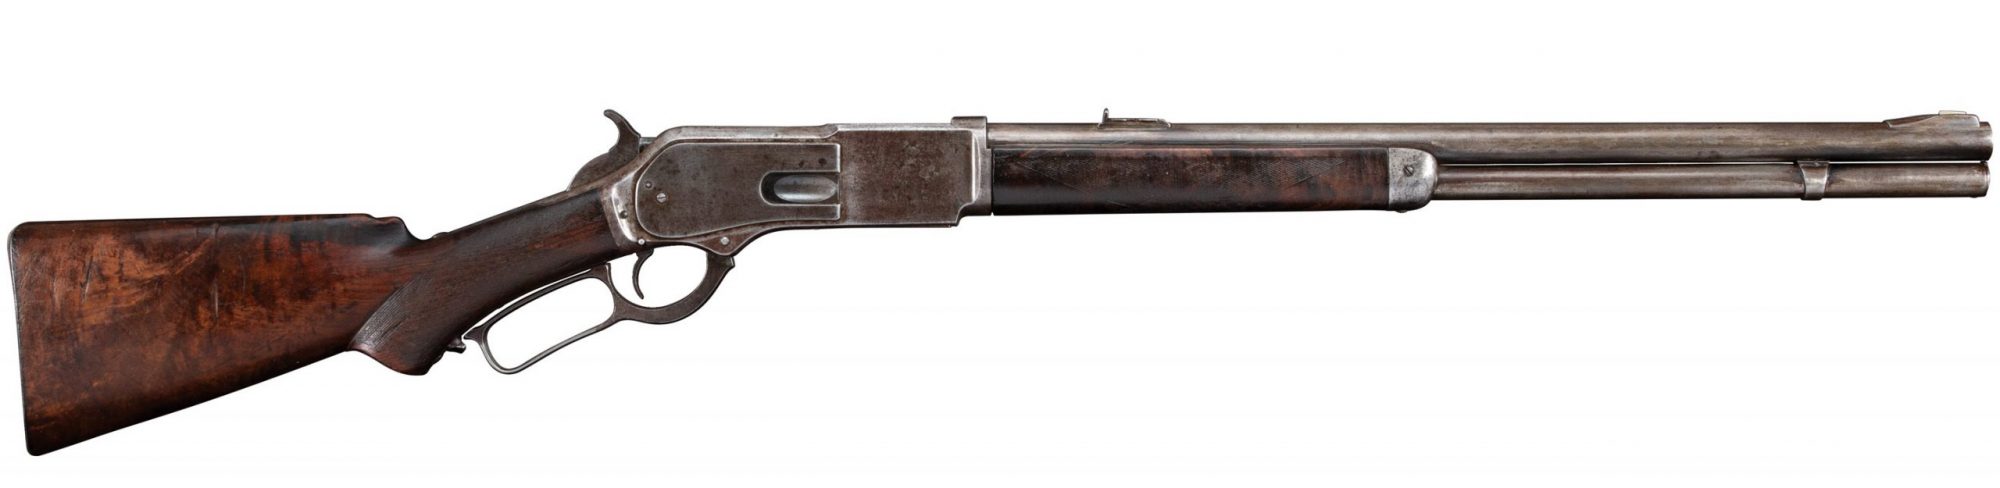 Photo of a Winchester Model 1876 from 1882, before restoration by Turnbull Restoration of Bloomfield NY